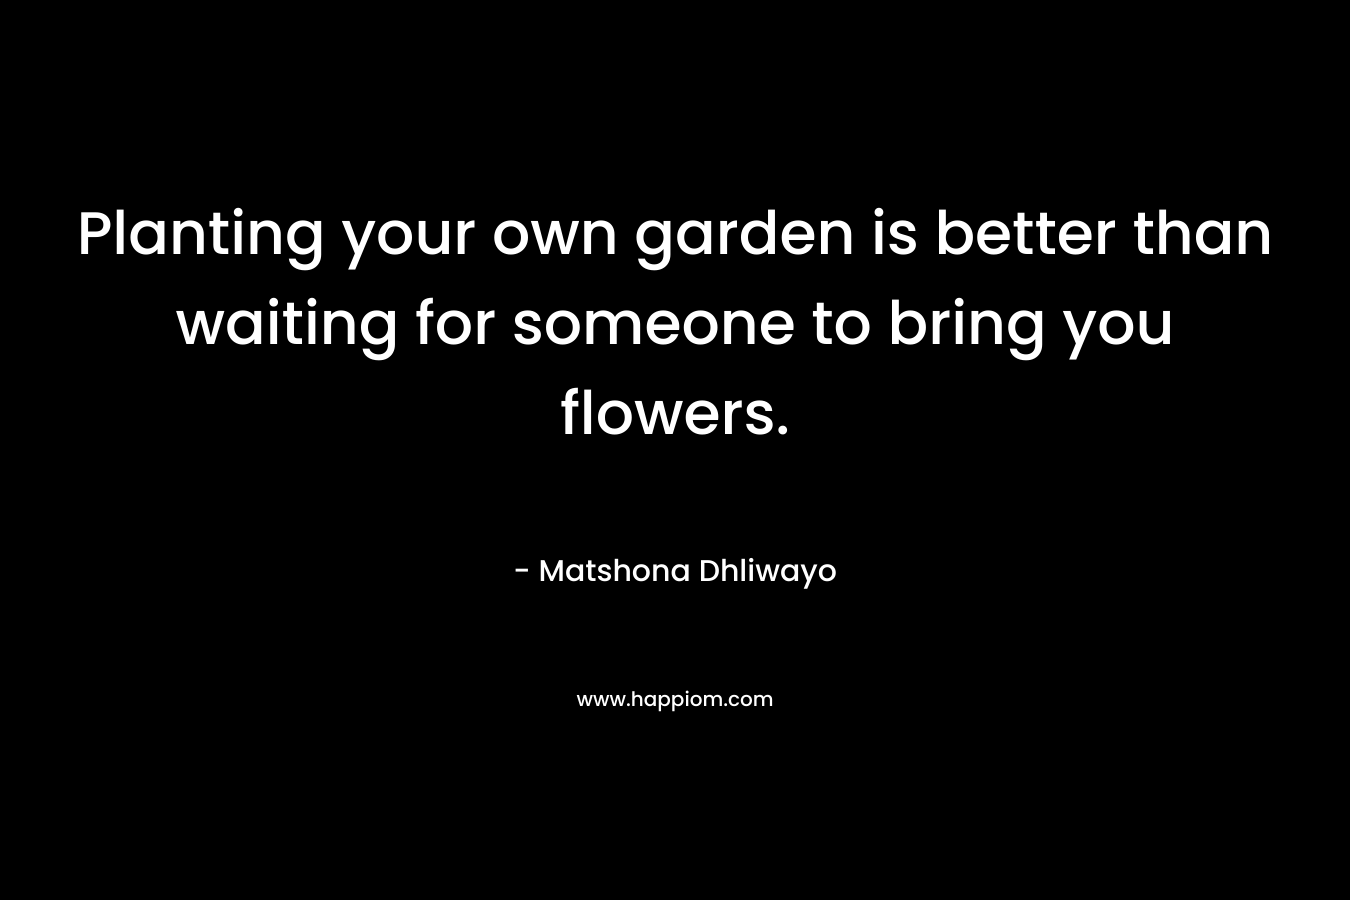 Planting your own garden is better than waiting for someone to bring you flowers.